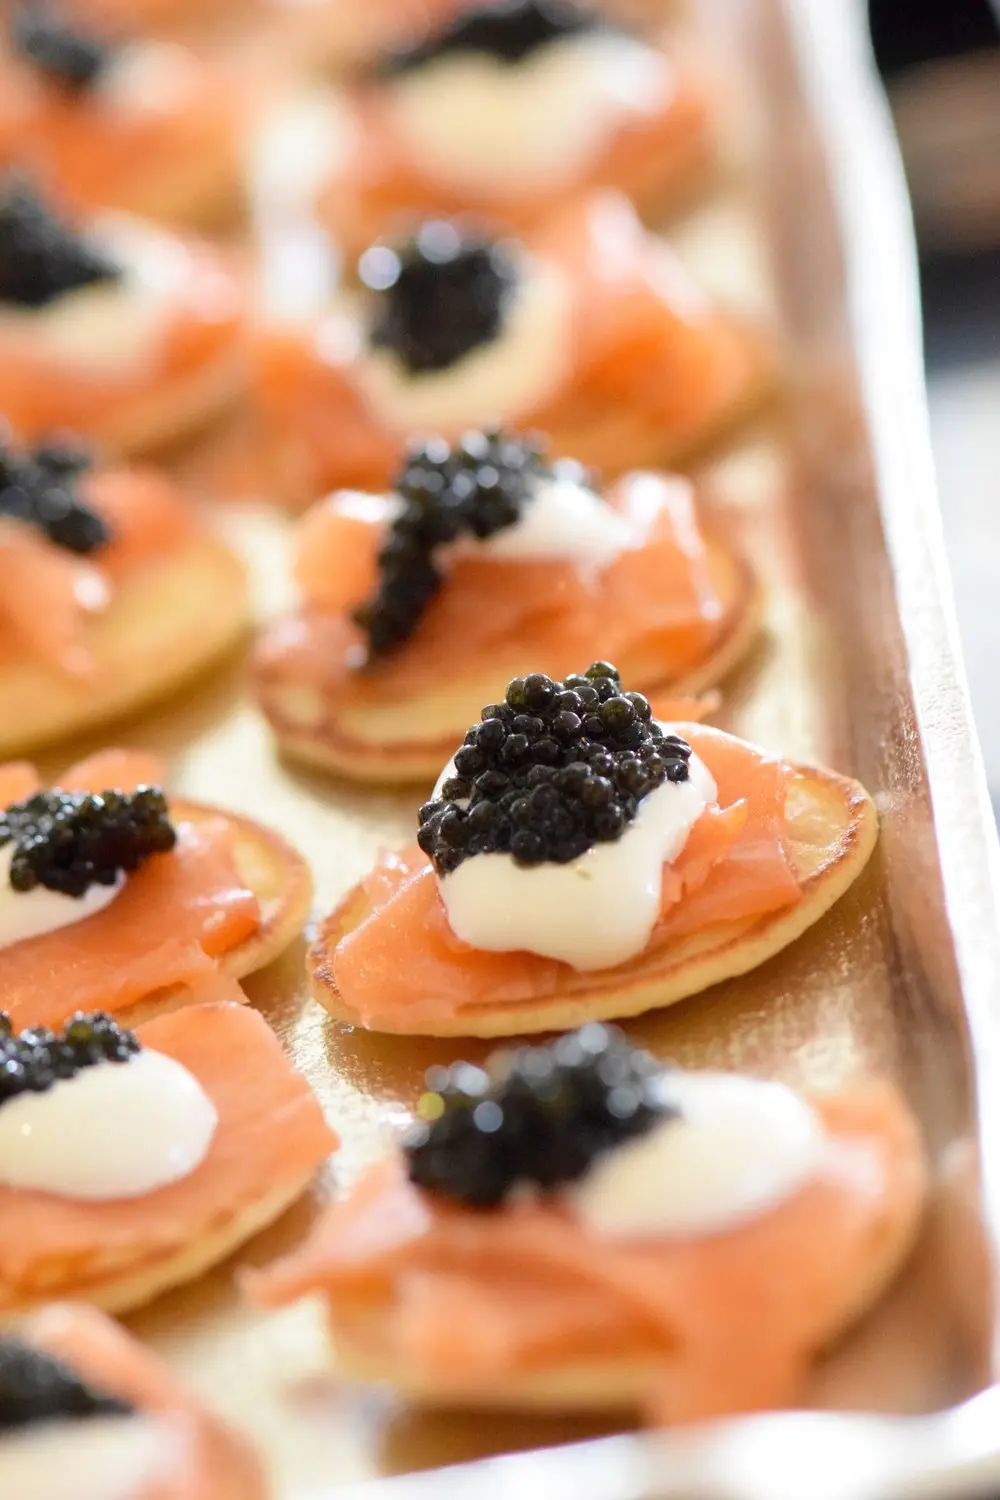 smoked salmon and caviar blinis - What to serve with caviar blinis